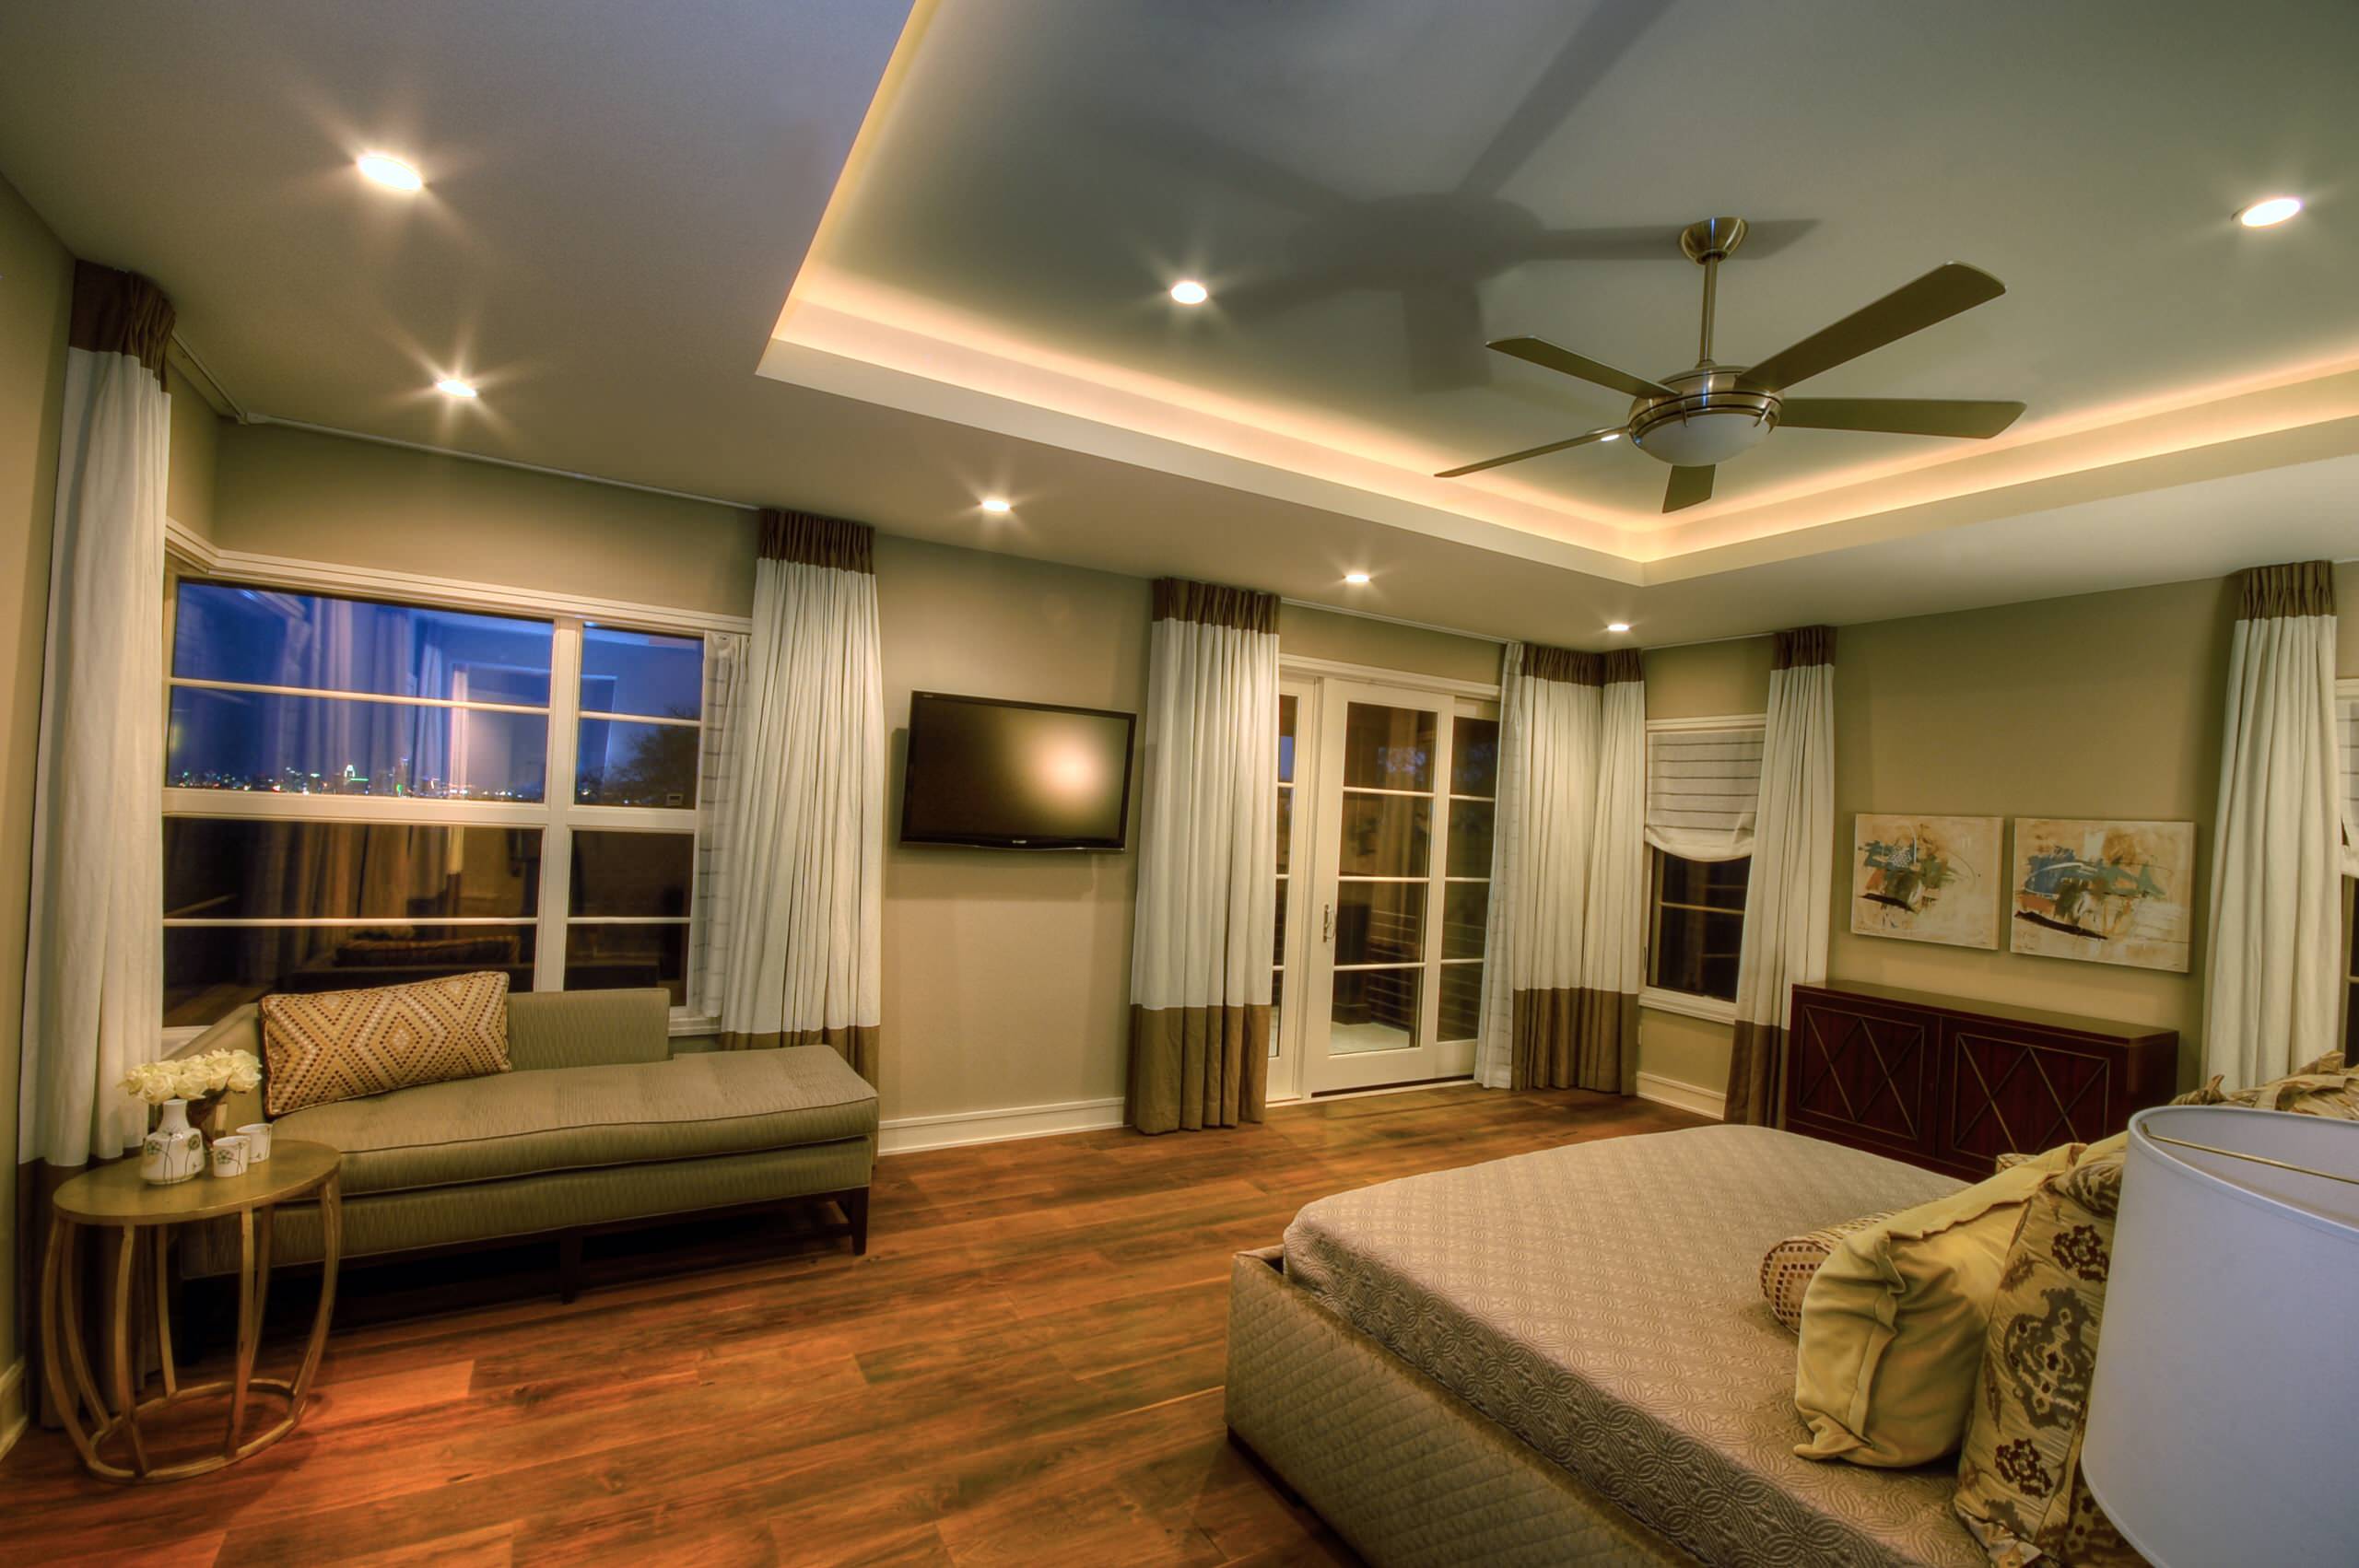 Tray Ceiling Recessed Lights - Photos & Ideas | Houzz